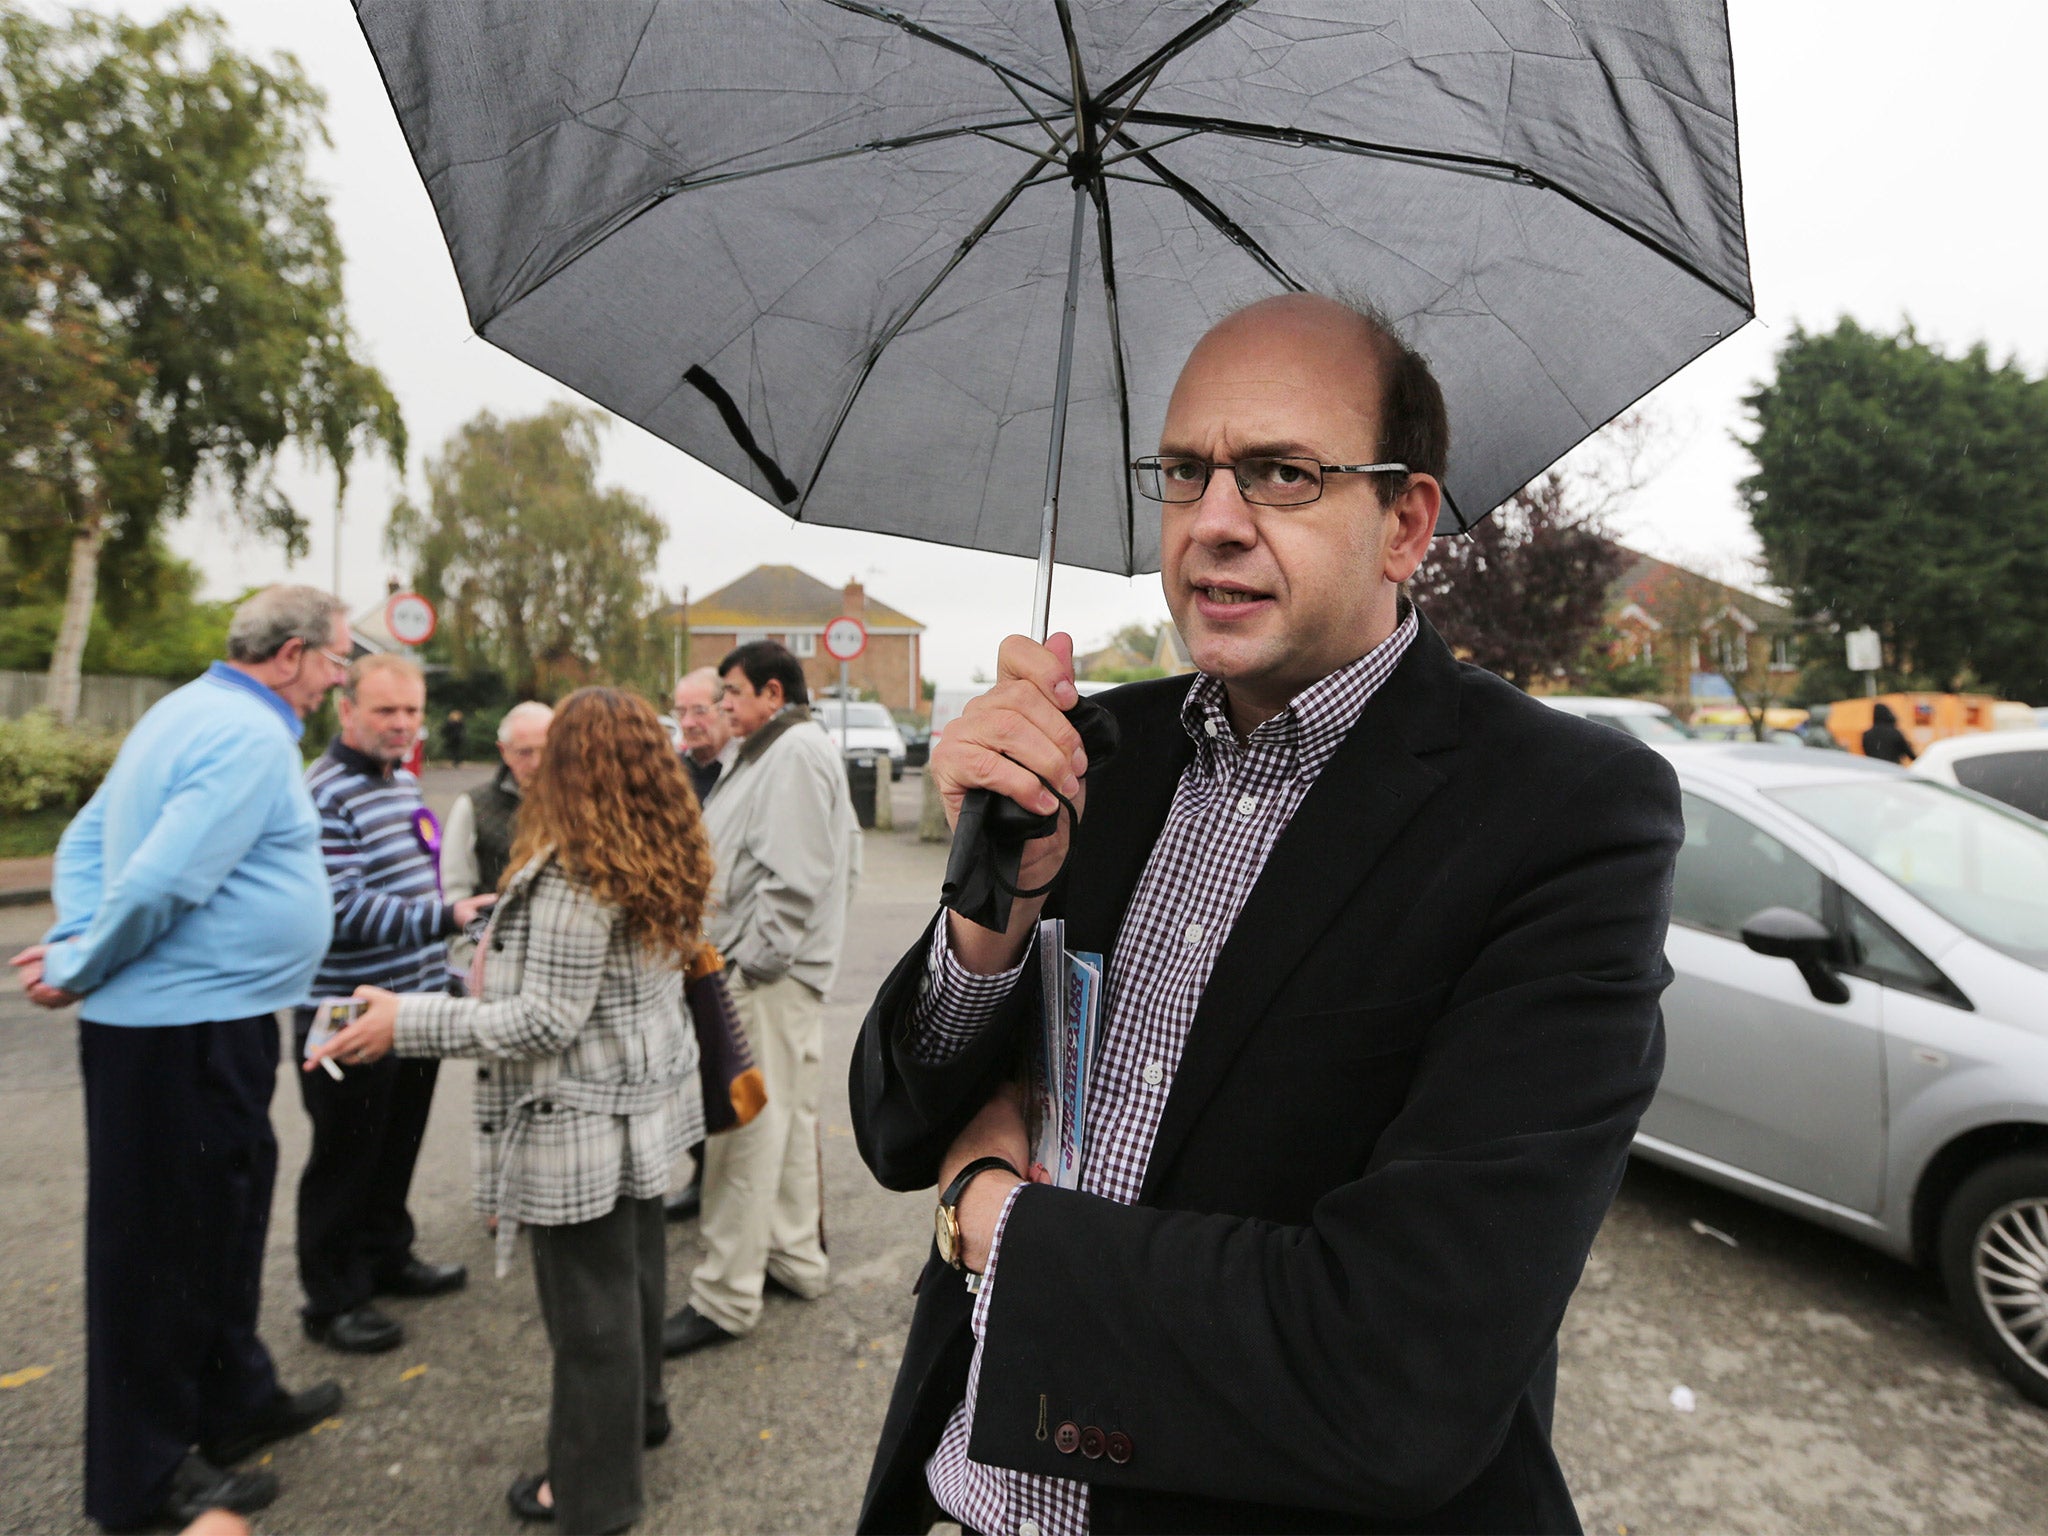 The Ukip candidate, and former Tory MP, Mark Reckless canvasses suport in Hoo, Kent